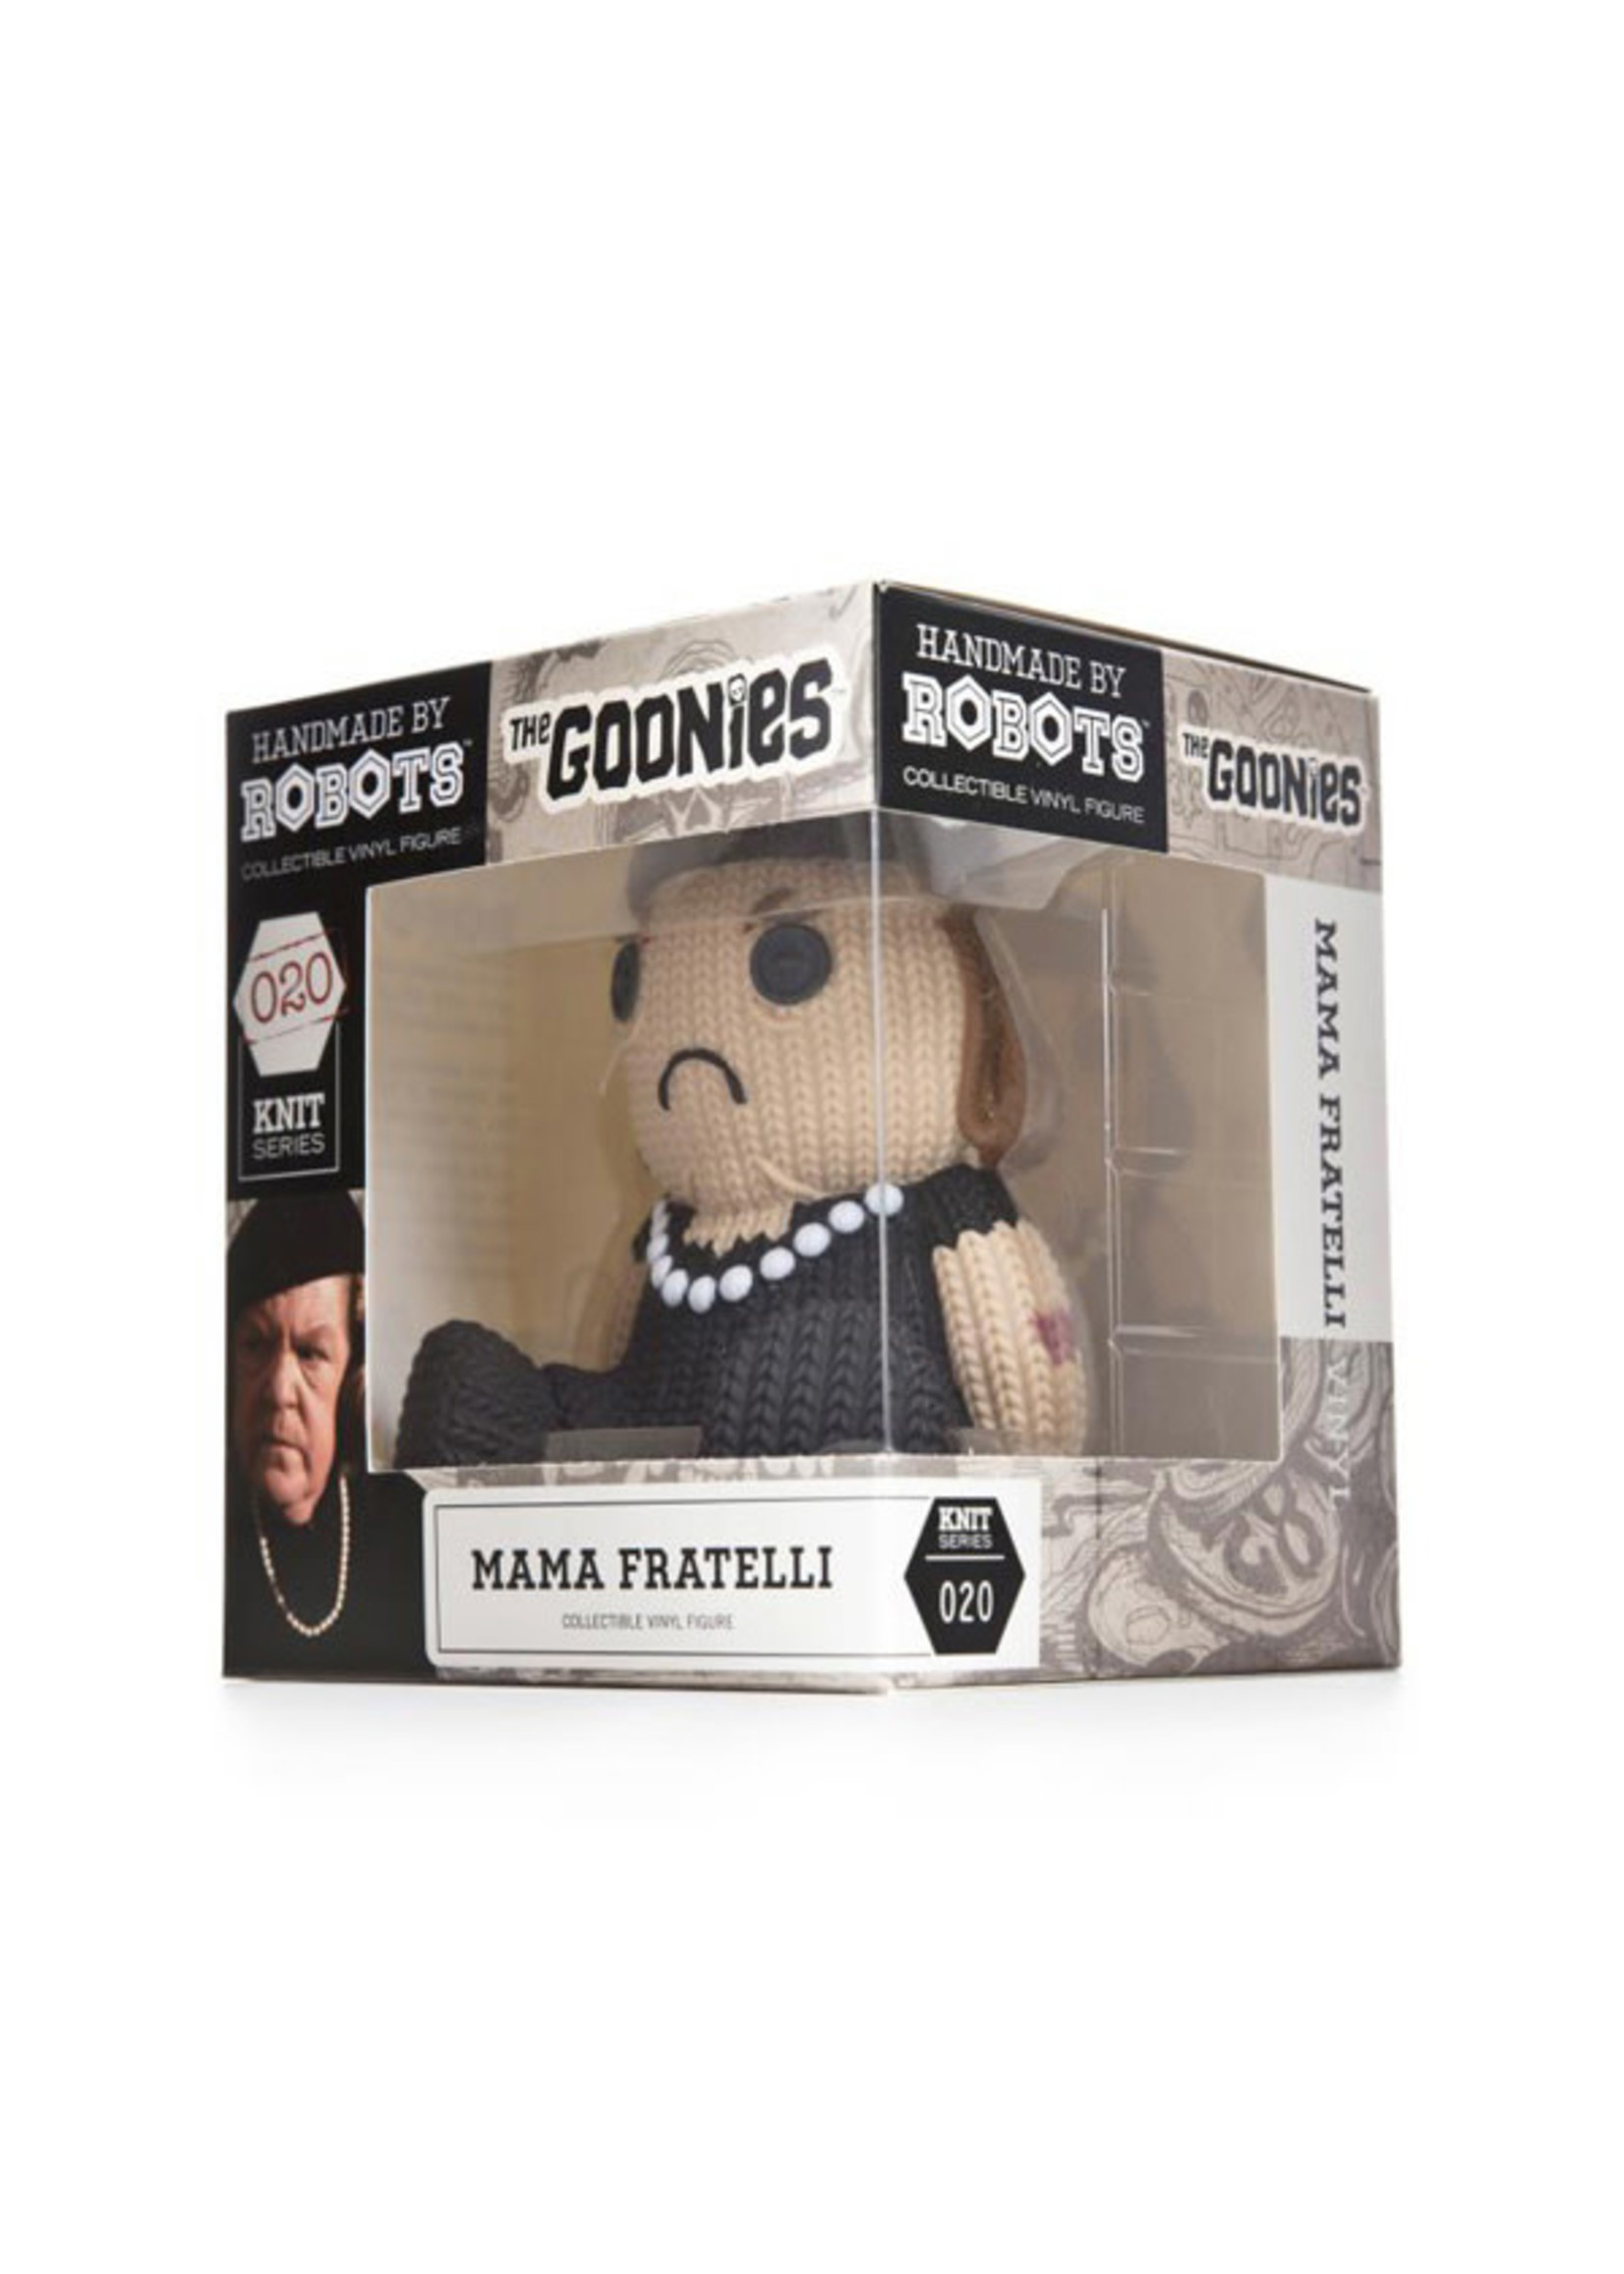 THE GOONIES MAMA FRATELLI HANDMADE BY ROBOTS 5